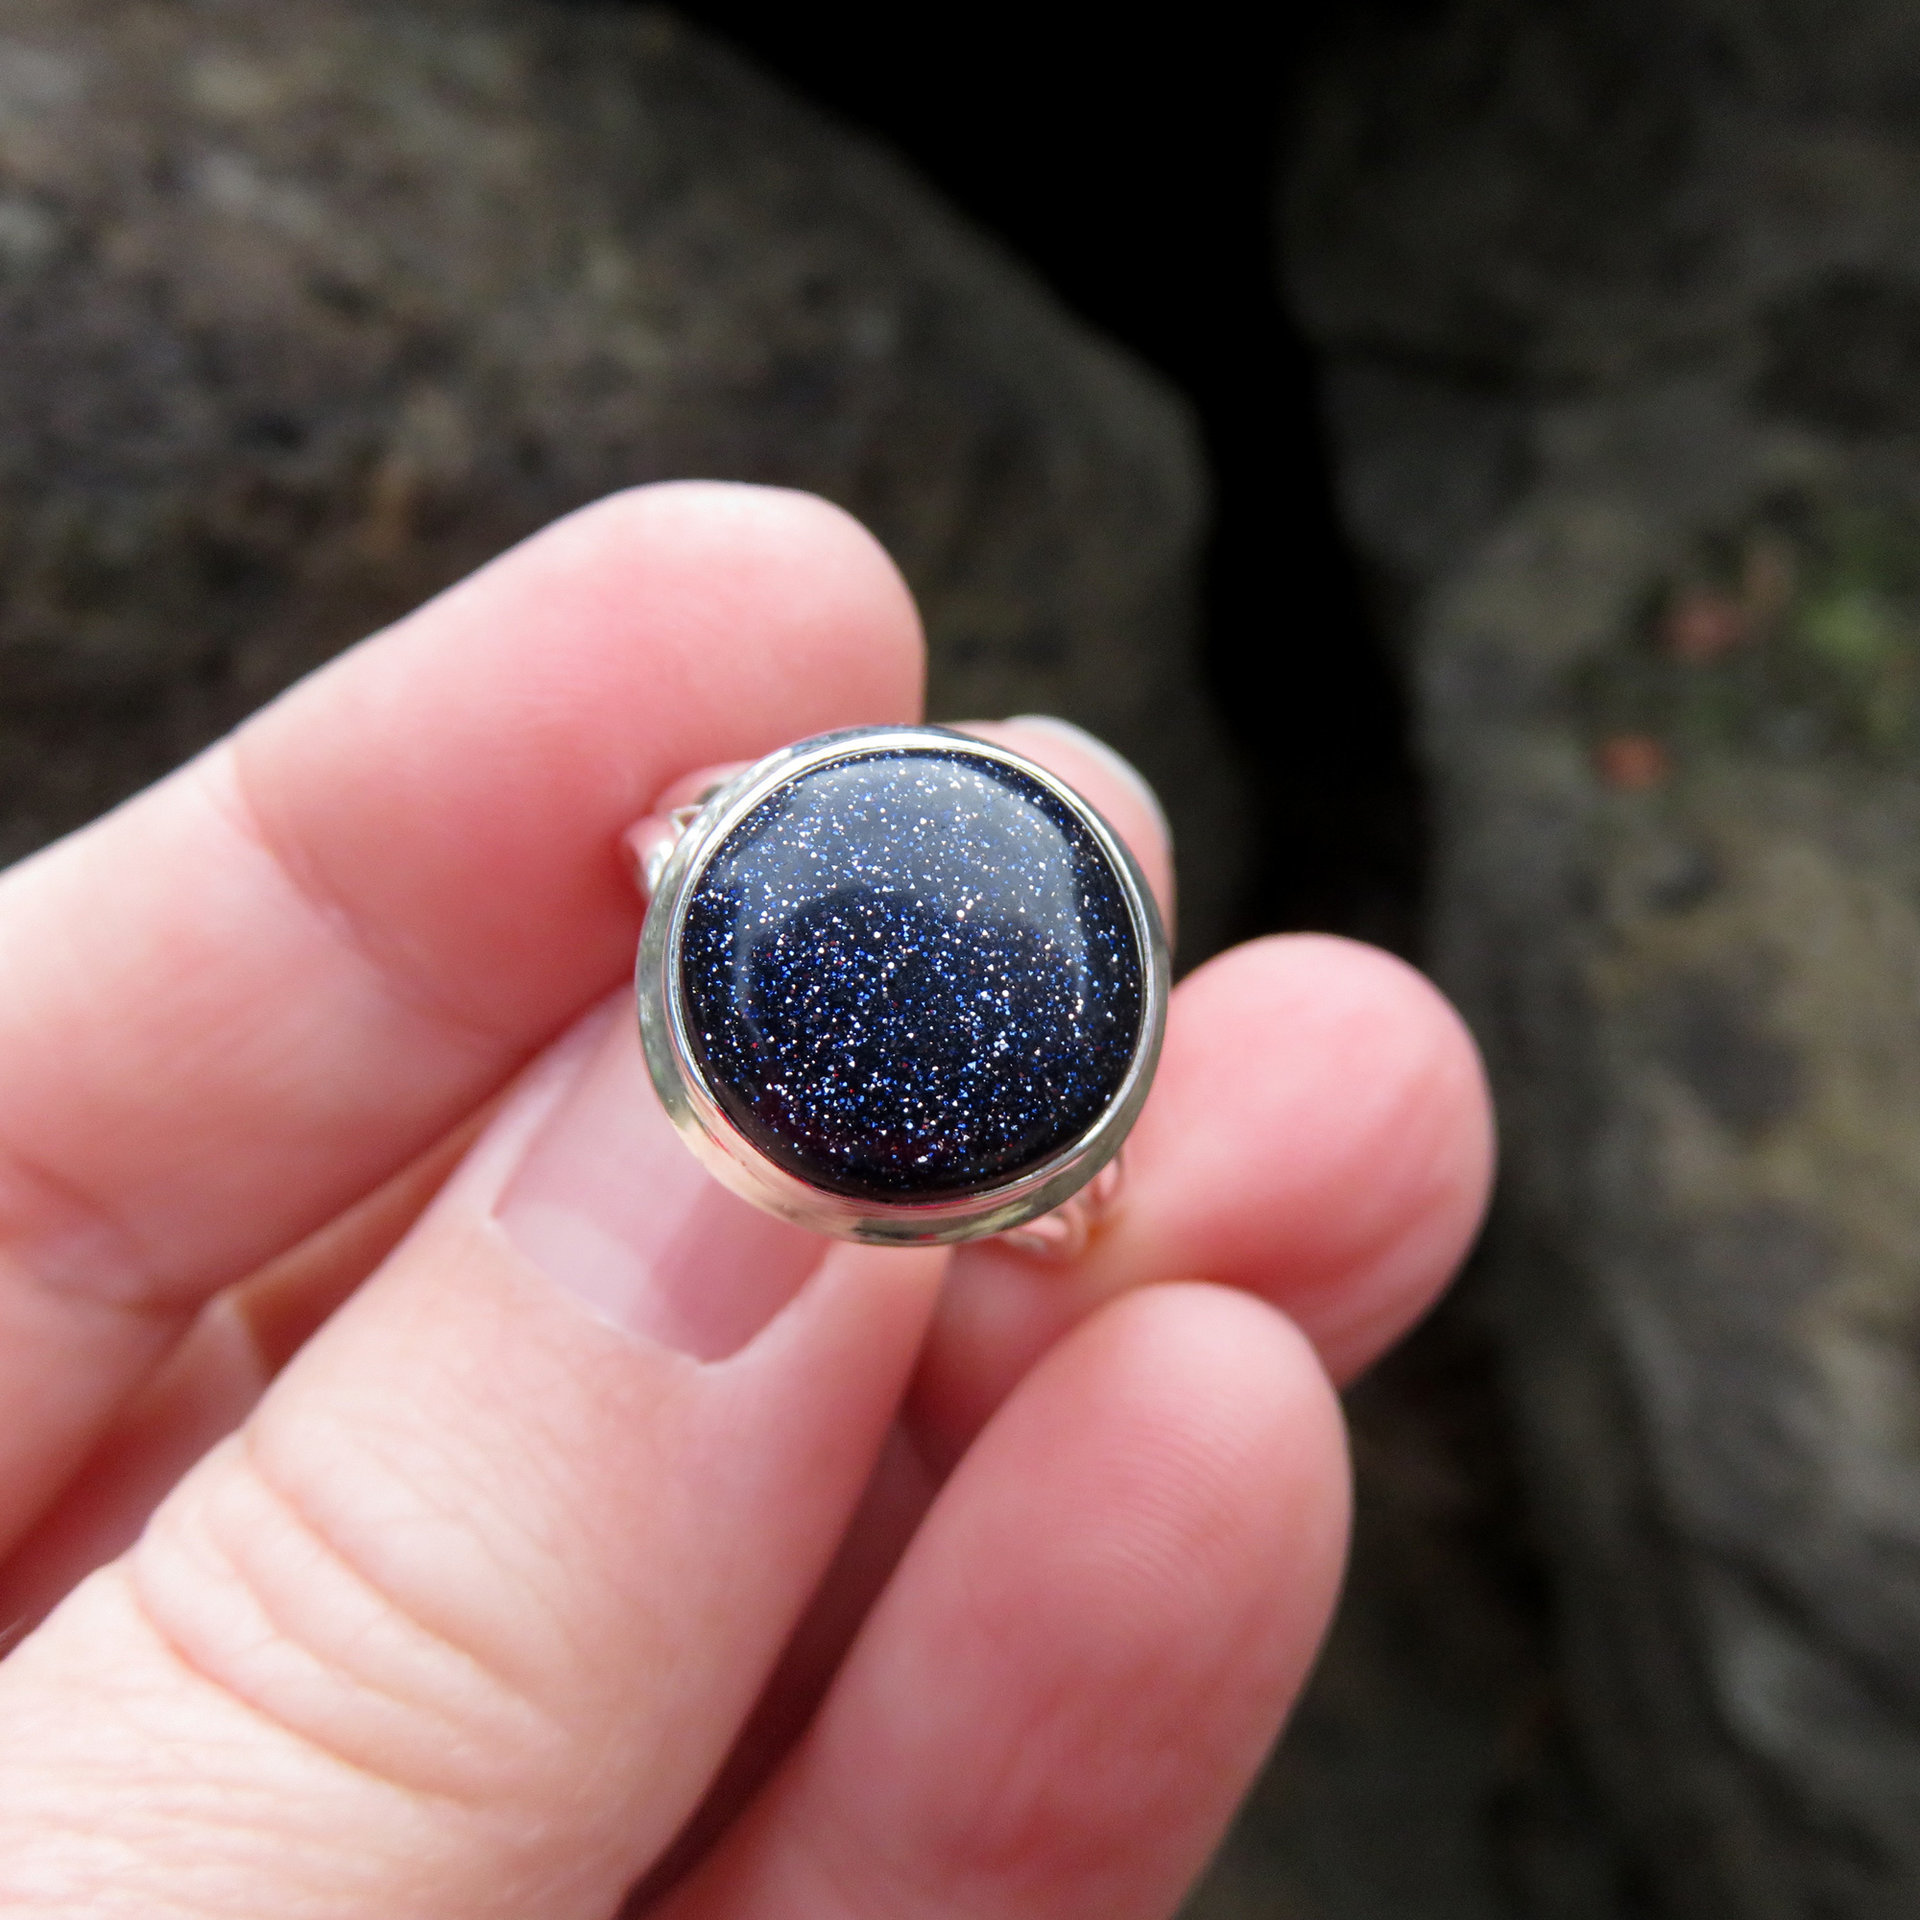 Sunstone Ring Size 9, Blue Round Cabochon, 925 Sterling Silver